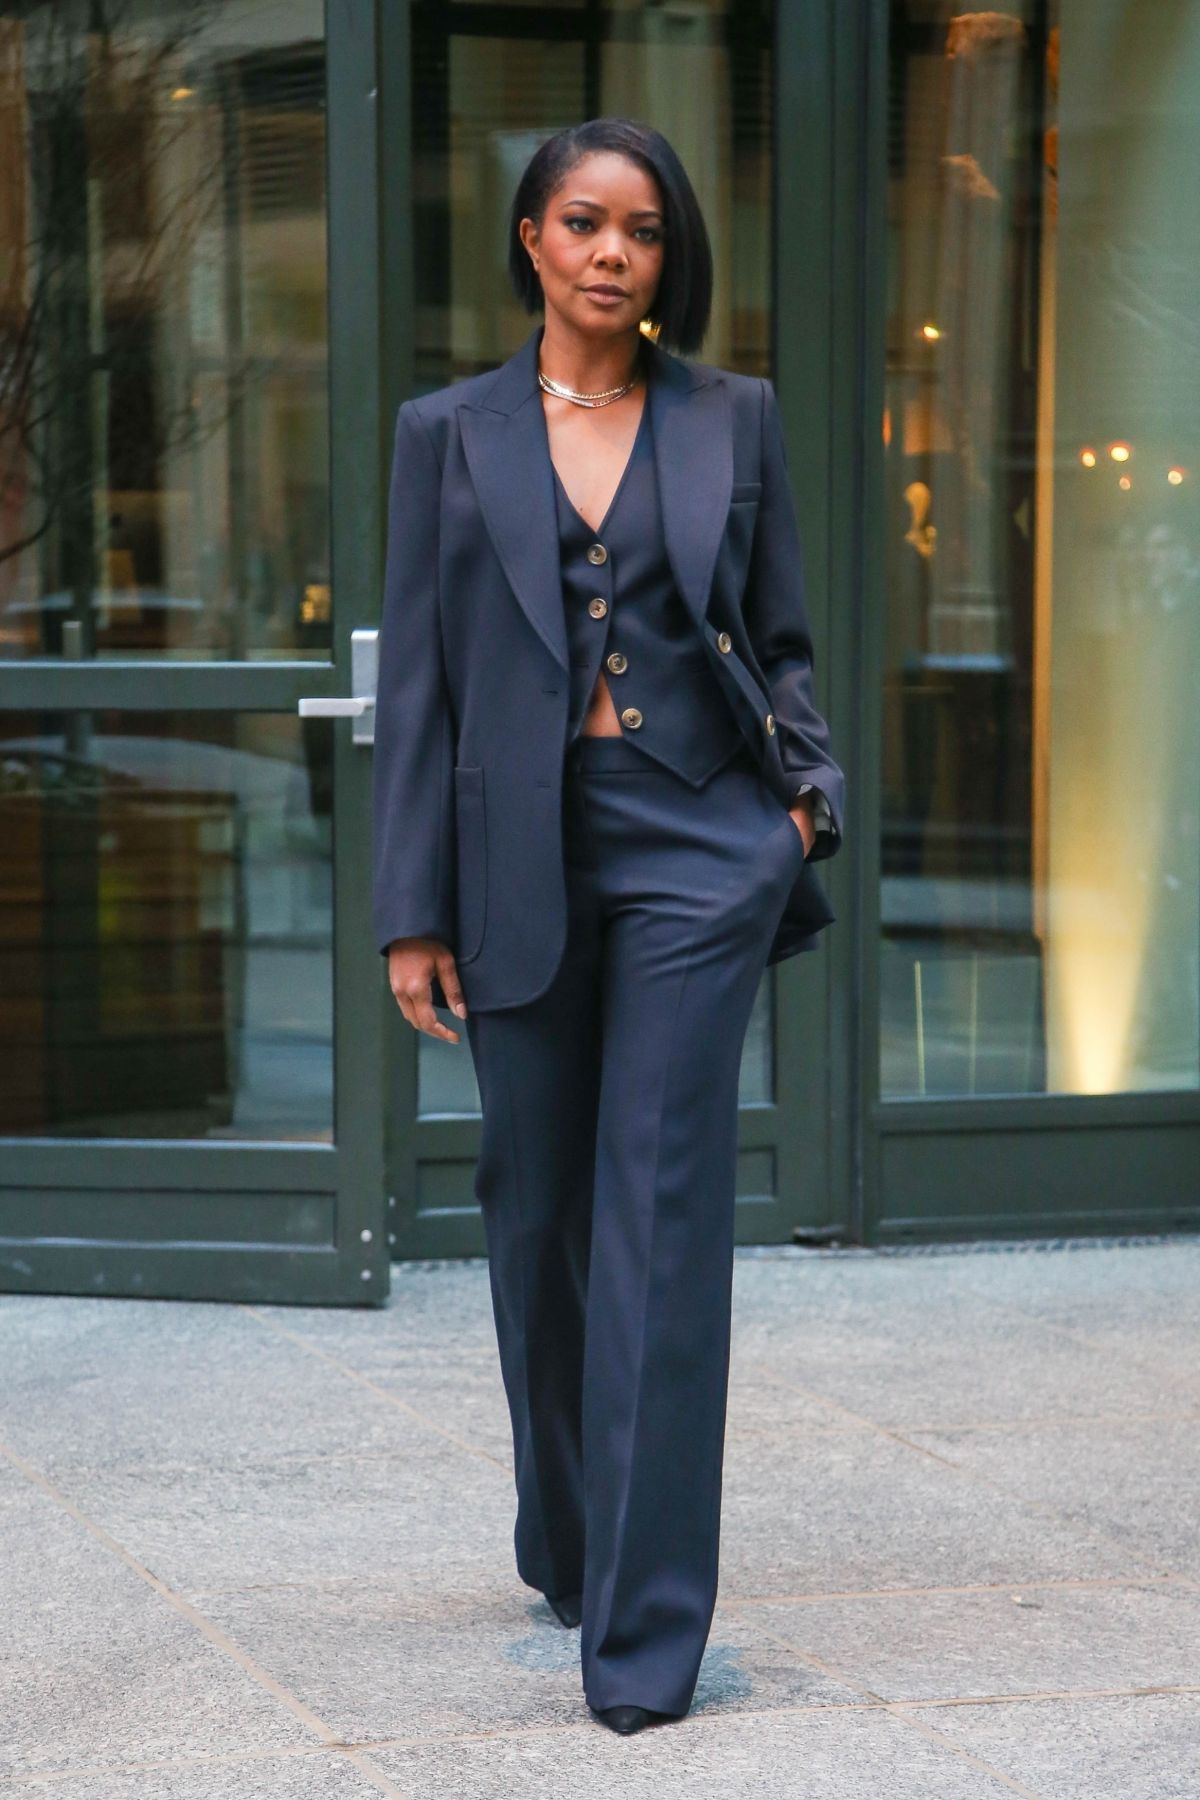 GABRIELLE UNION at a Pphotosshoot in New York 03/11/2022 – HawtCelebs